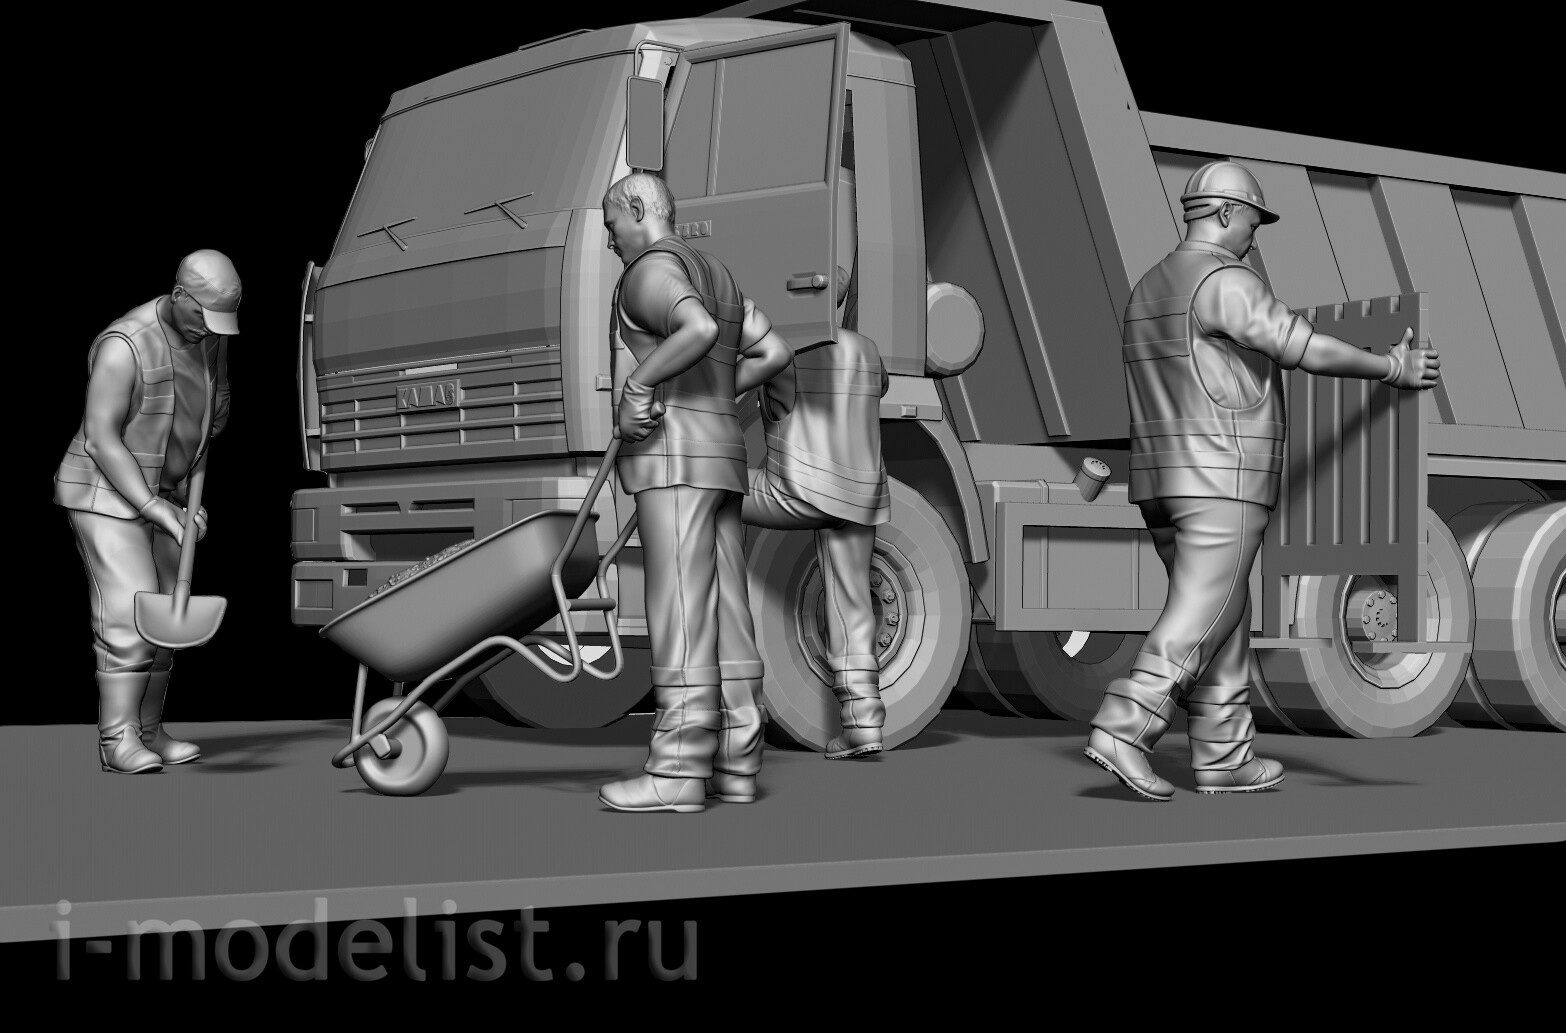 im35098 Imodelist 1/35 Figure of a road worker with a trolley for the model 3650 Zvezda